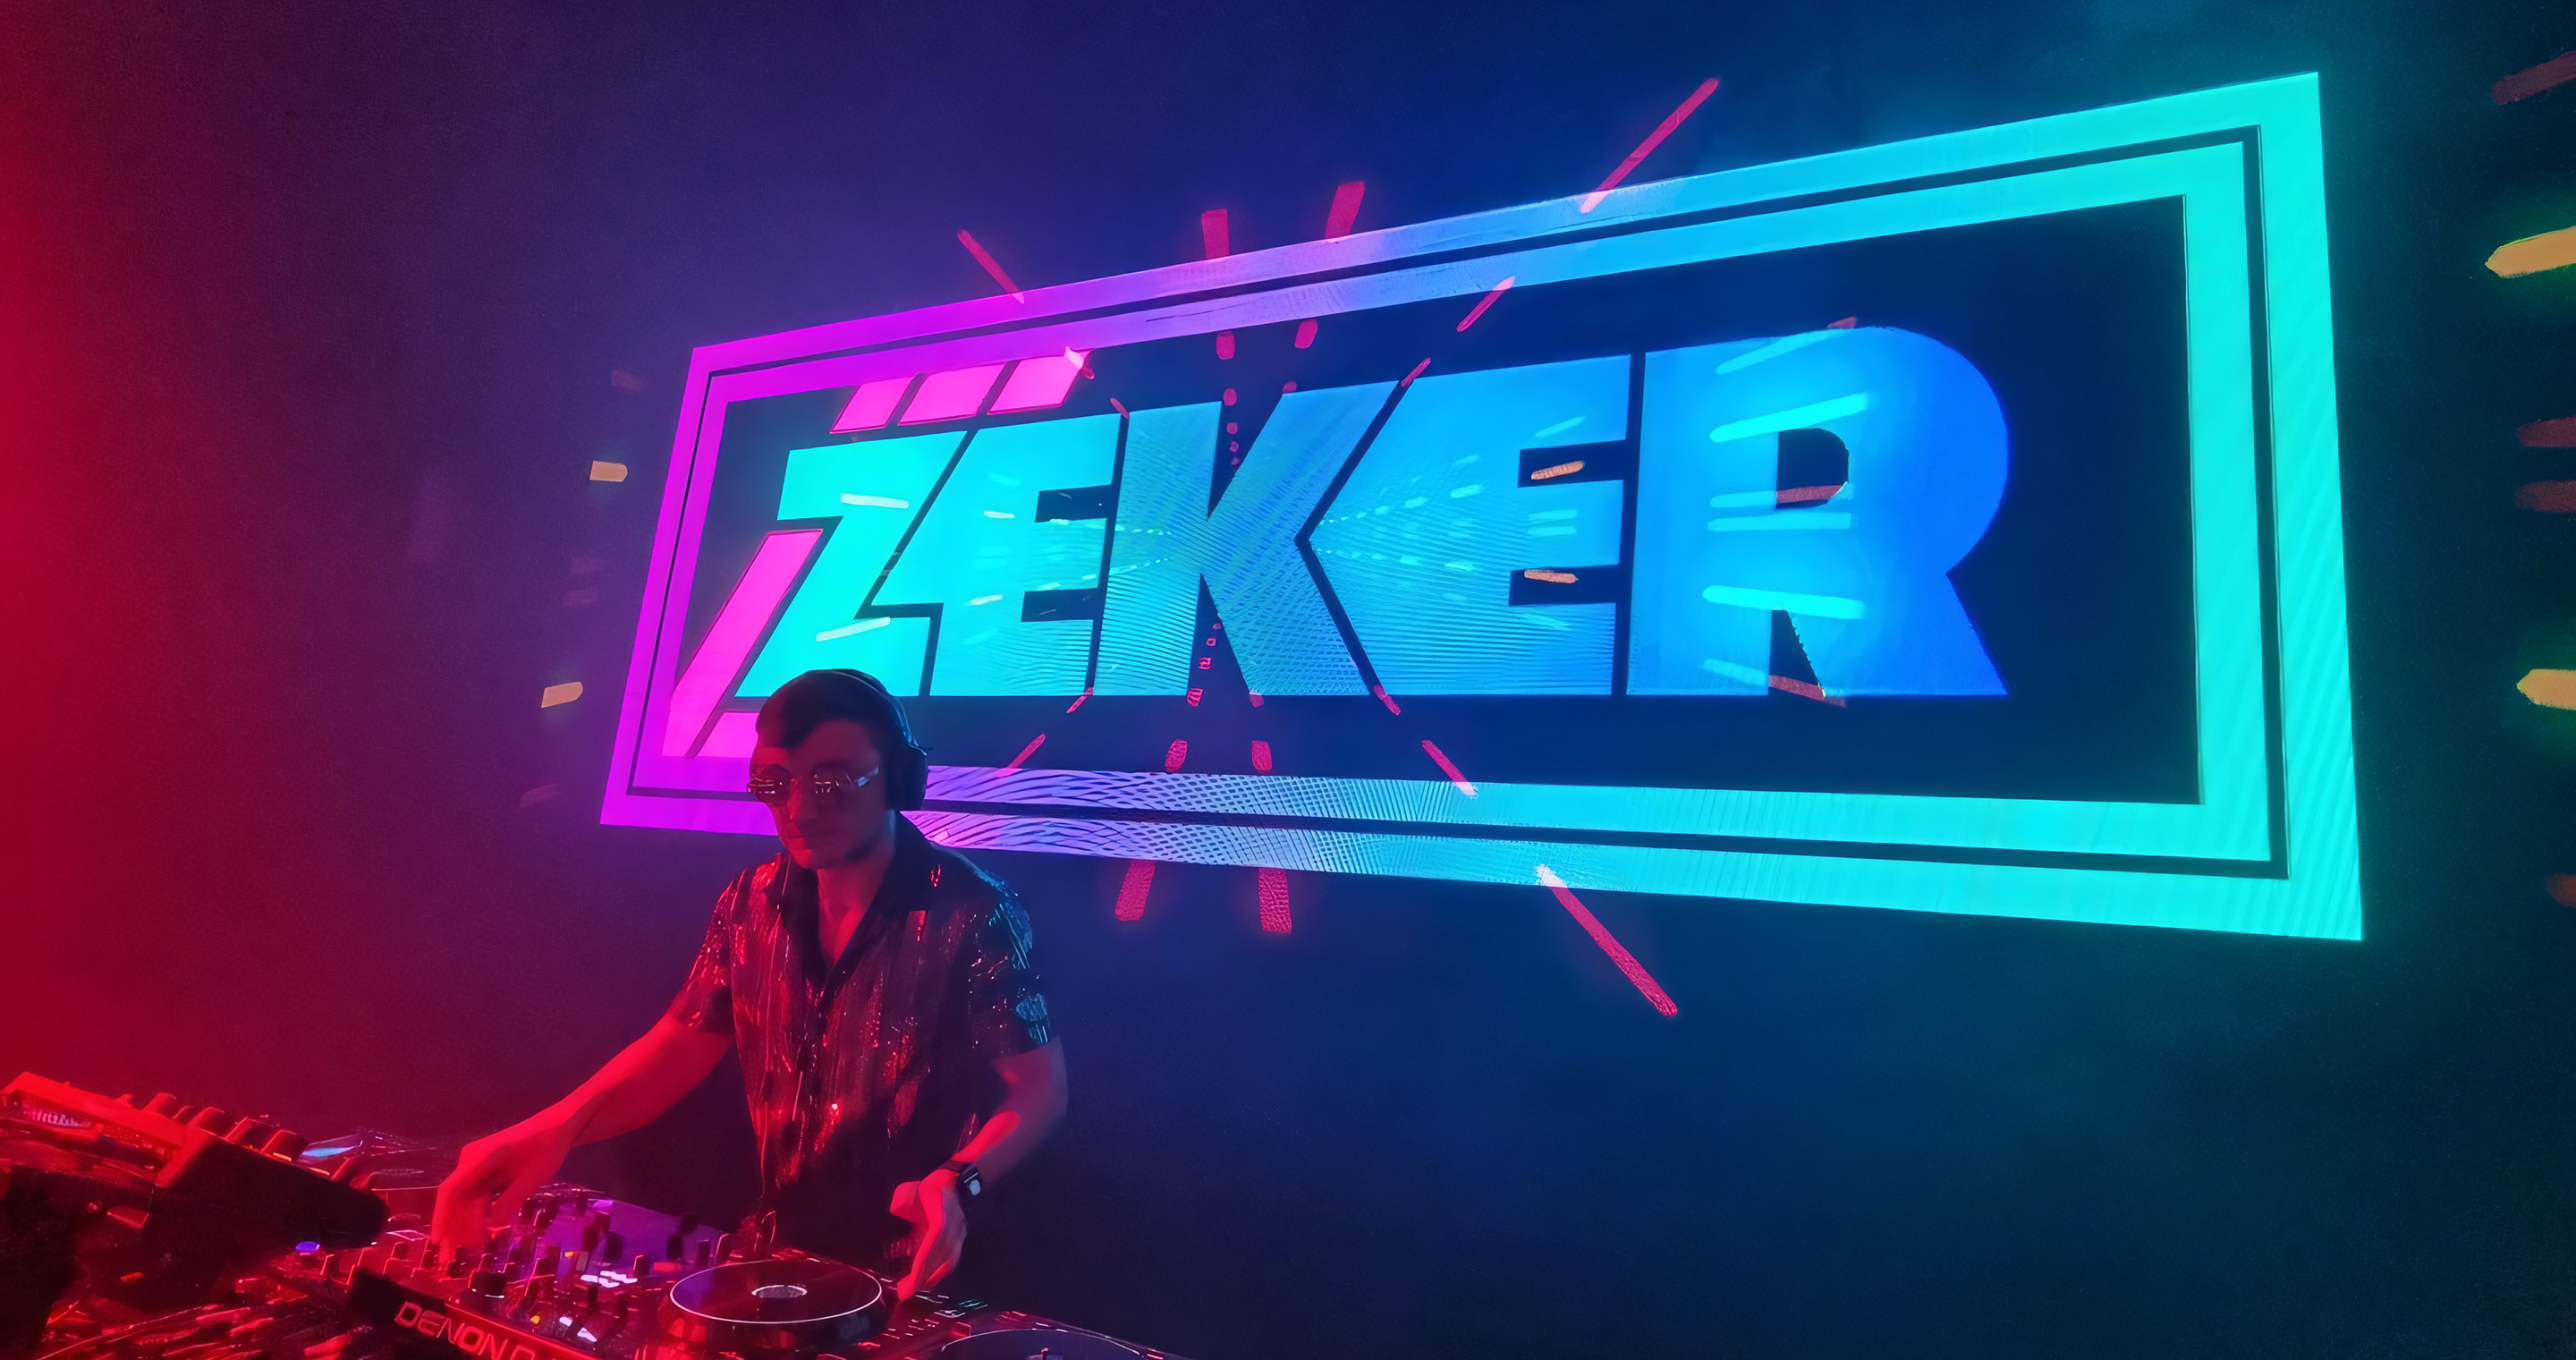 Zeker DJing on the decks with logo projected behind him